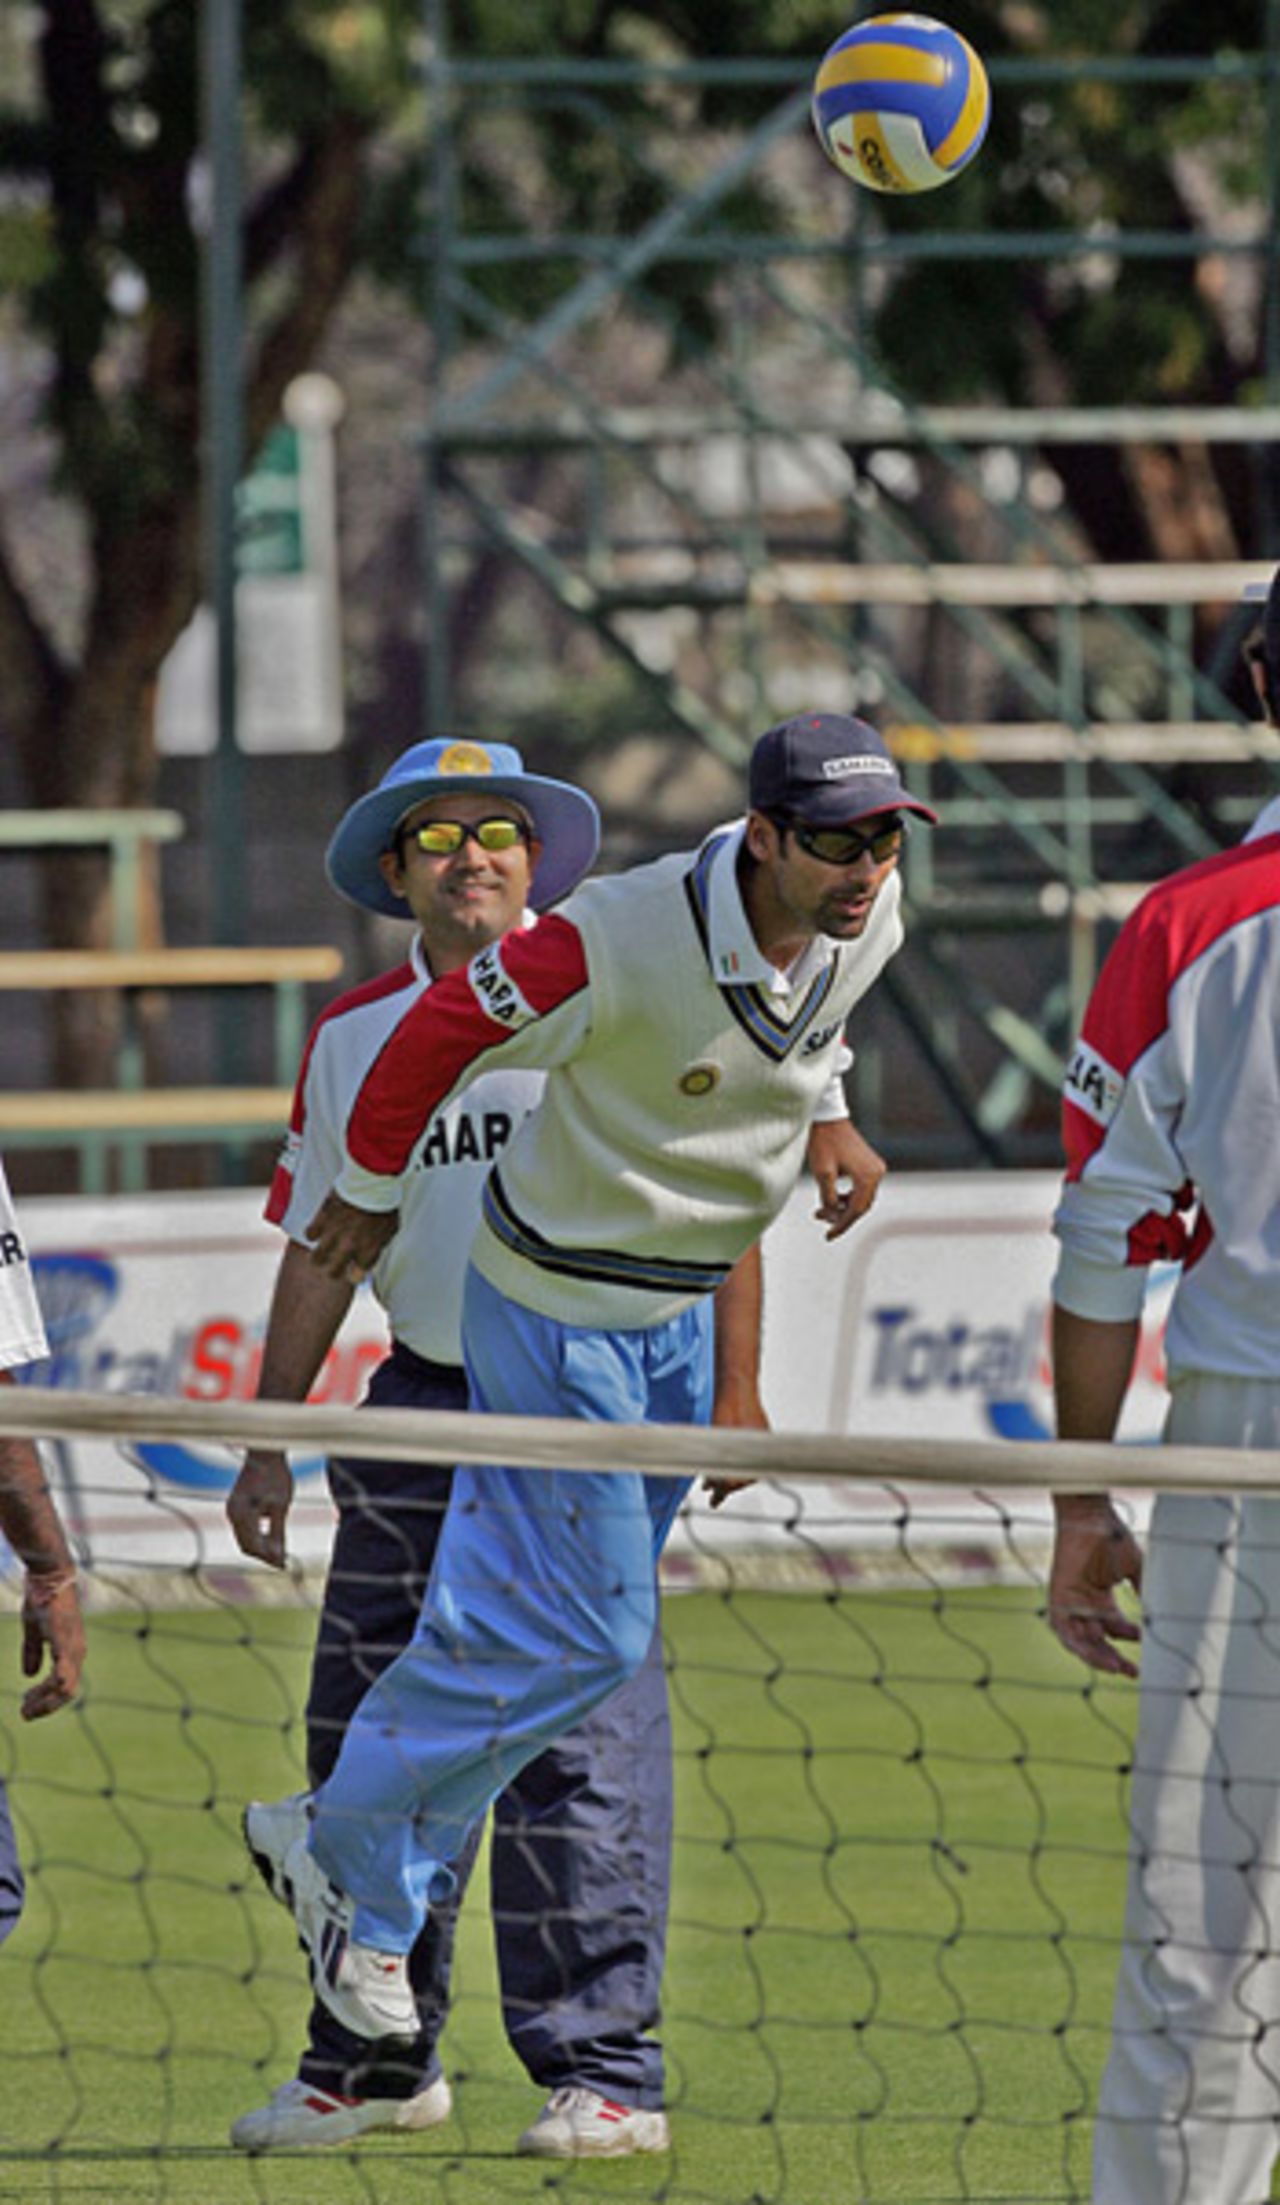 That's just not cricket: Mohammad Kaif heads a ball during a training session, Harare, September 5, 2005